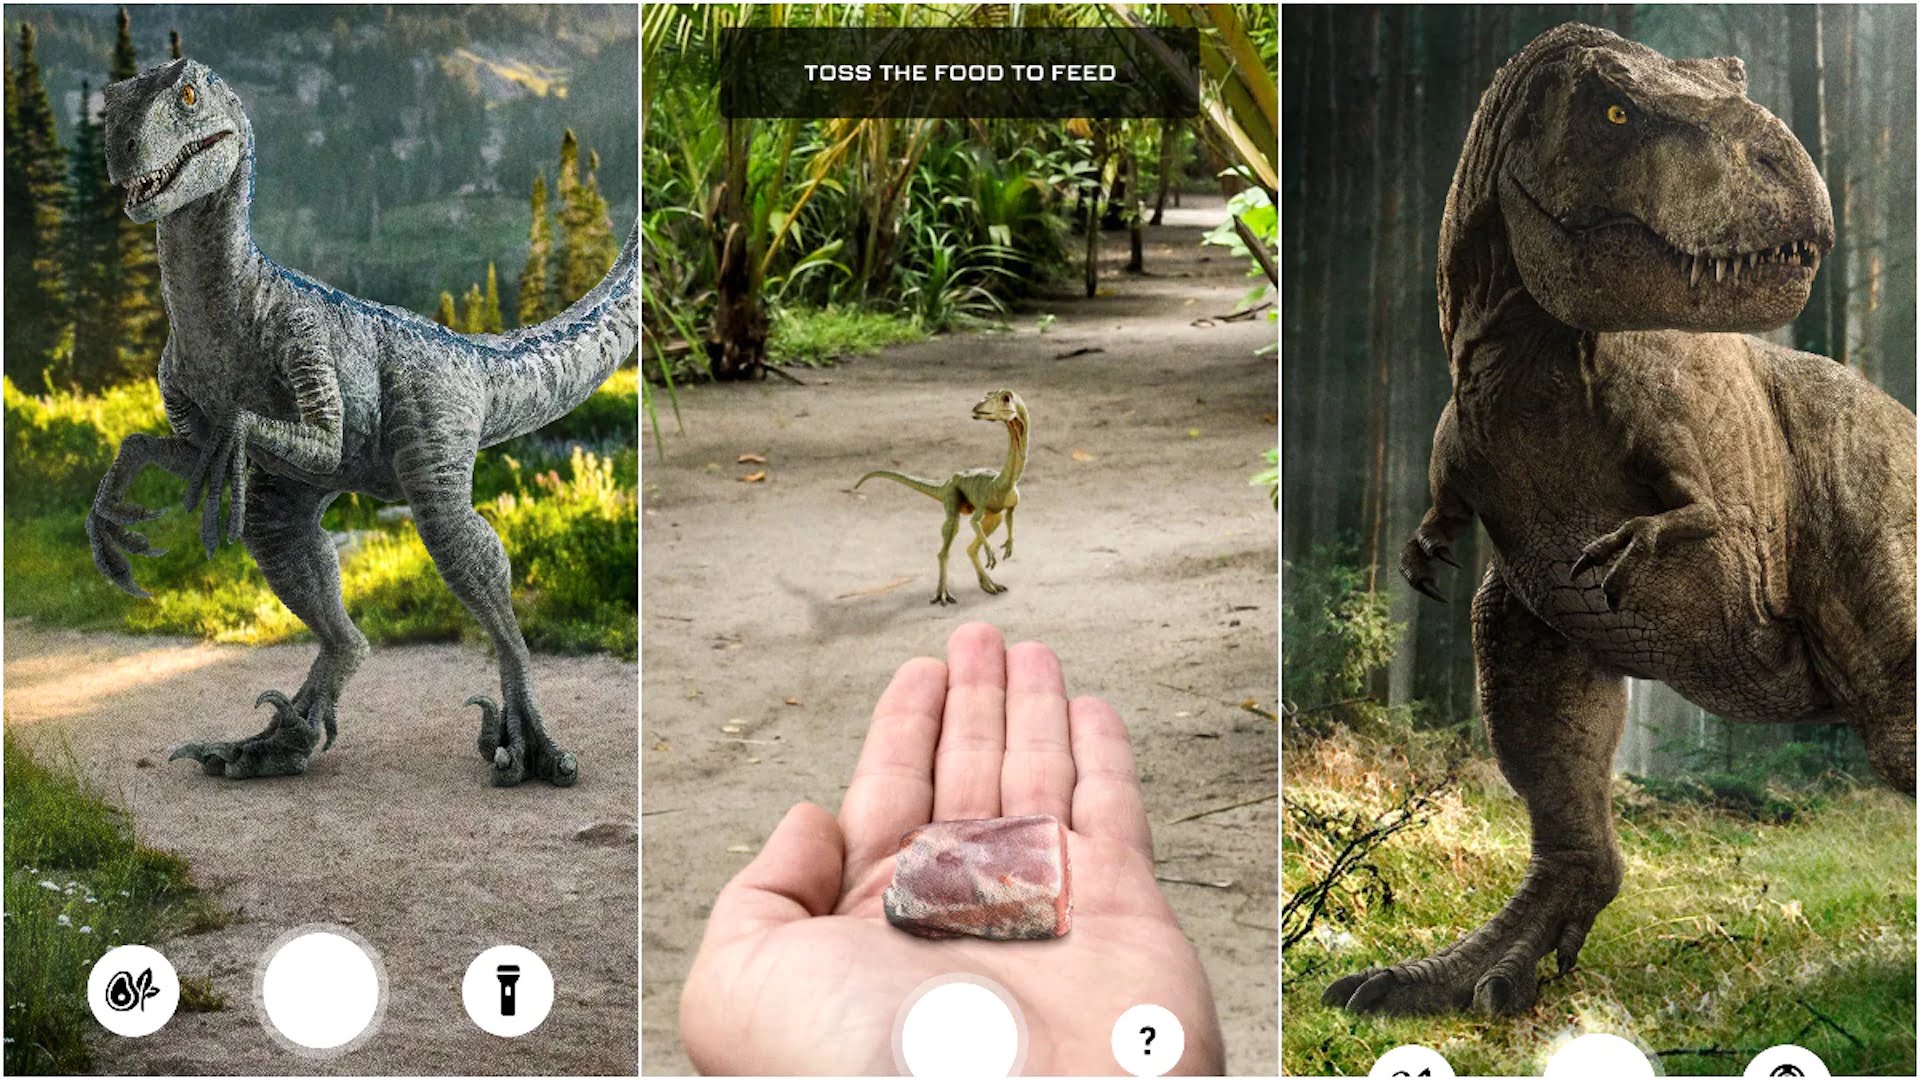 Jurassic World Dinotracker AR lets you find dinosaurs in the real